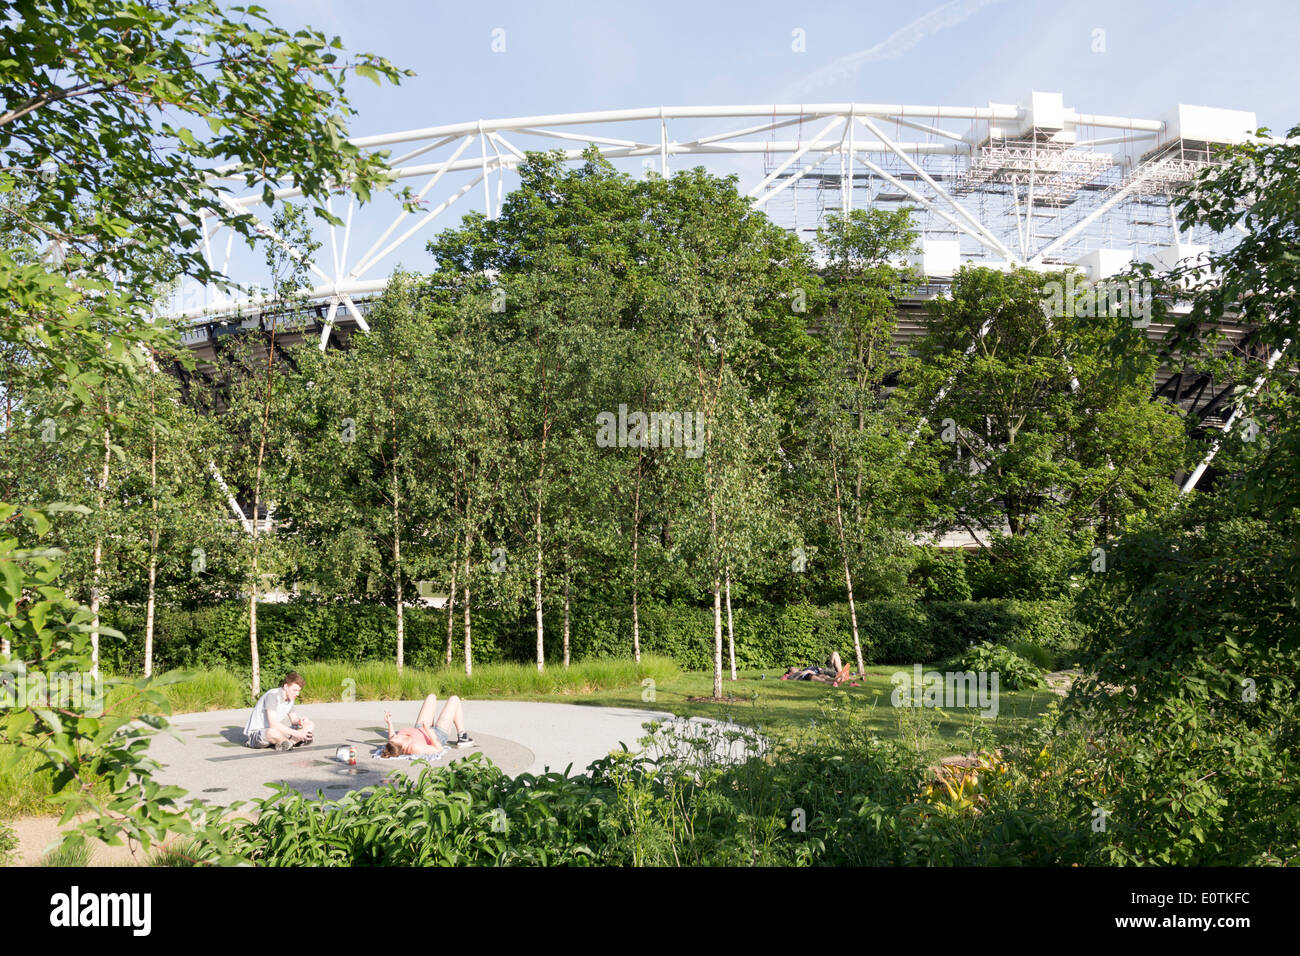 The Queen Elizabeth Olympic Park - Stratford - London Stock Photo